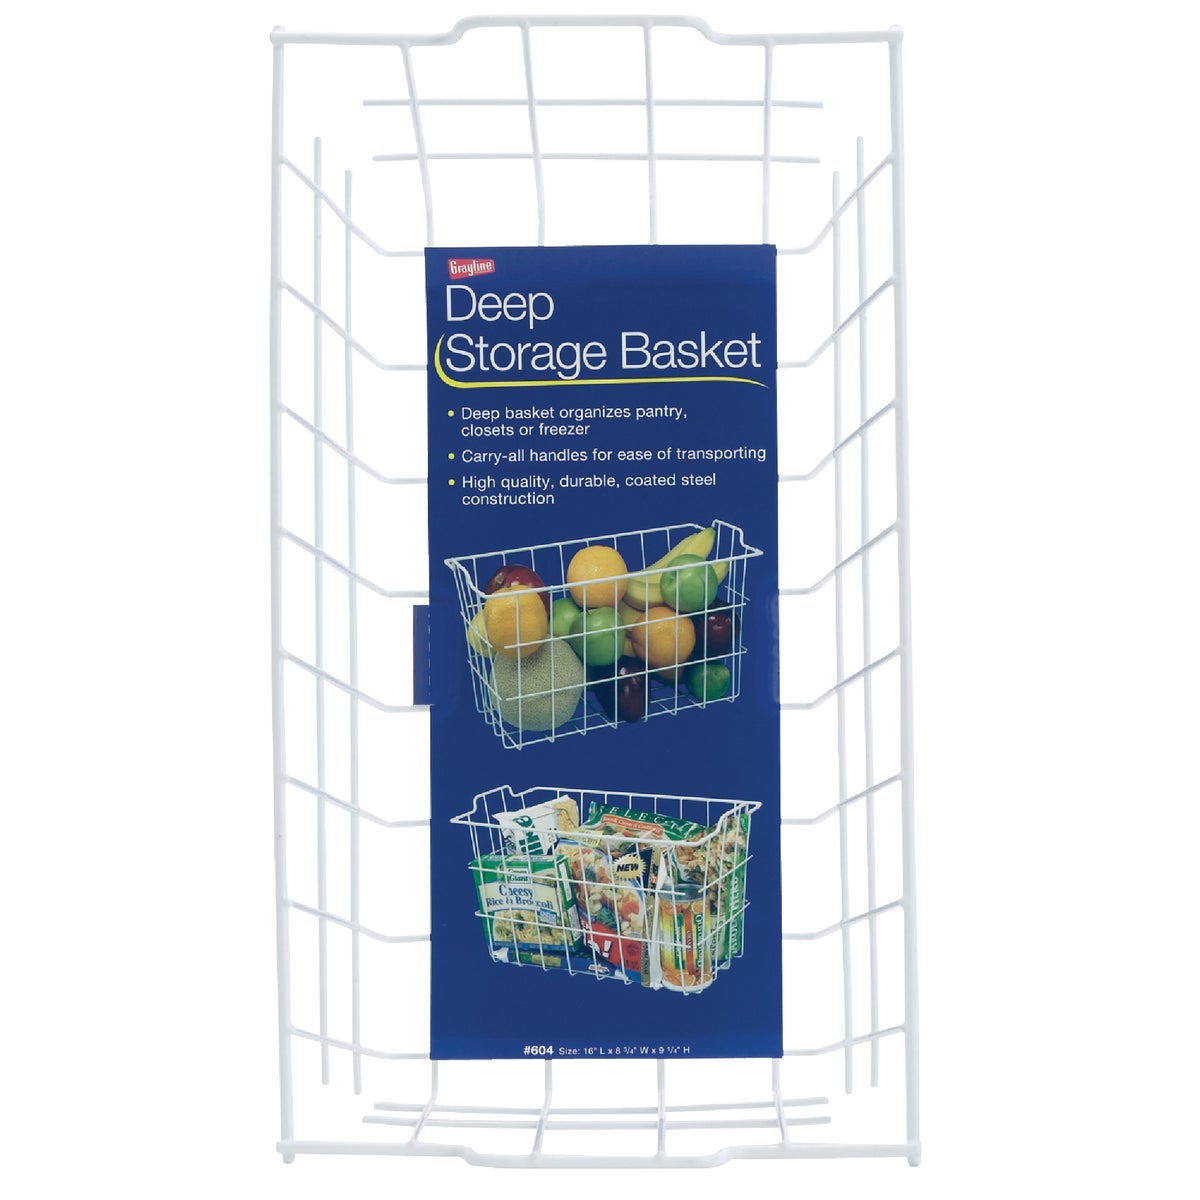 Item 606960, Sturdy wire with white vinyl coating. Use in pantry, closets, and freezer.